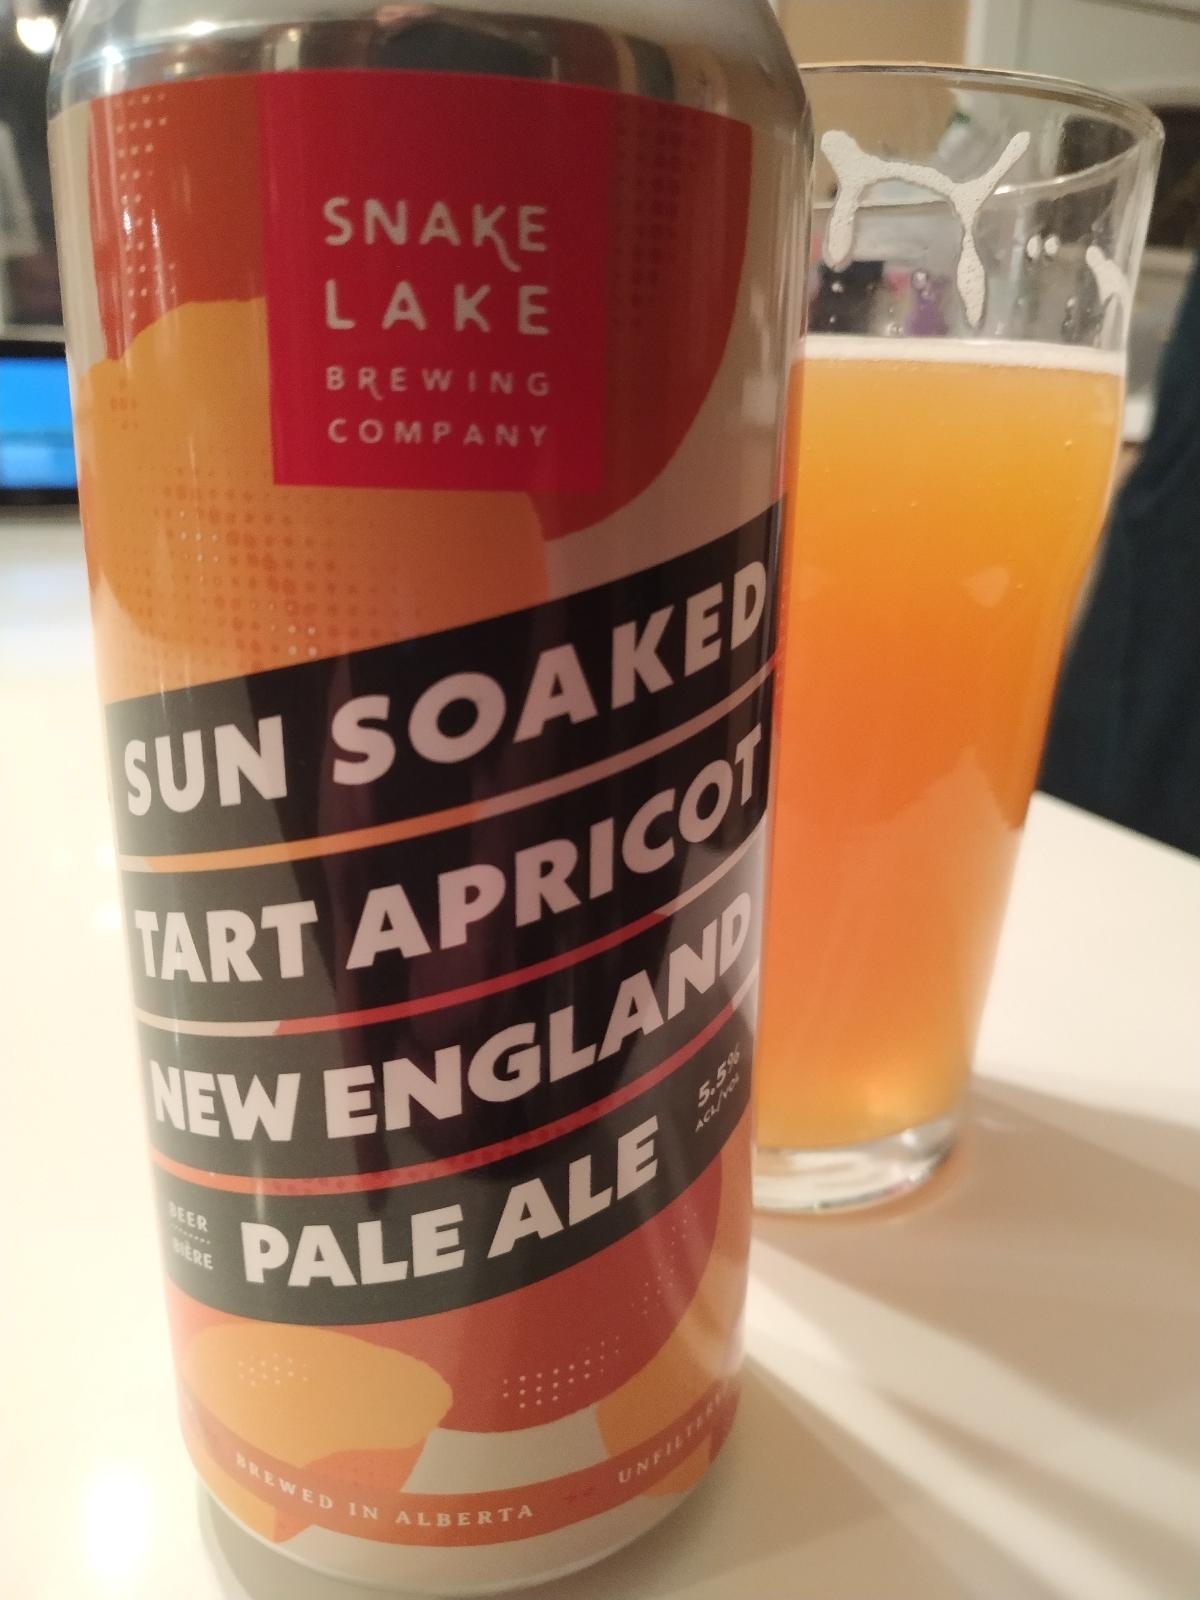 Sun Soaked Tart Apricot New England Pale Ale